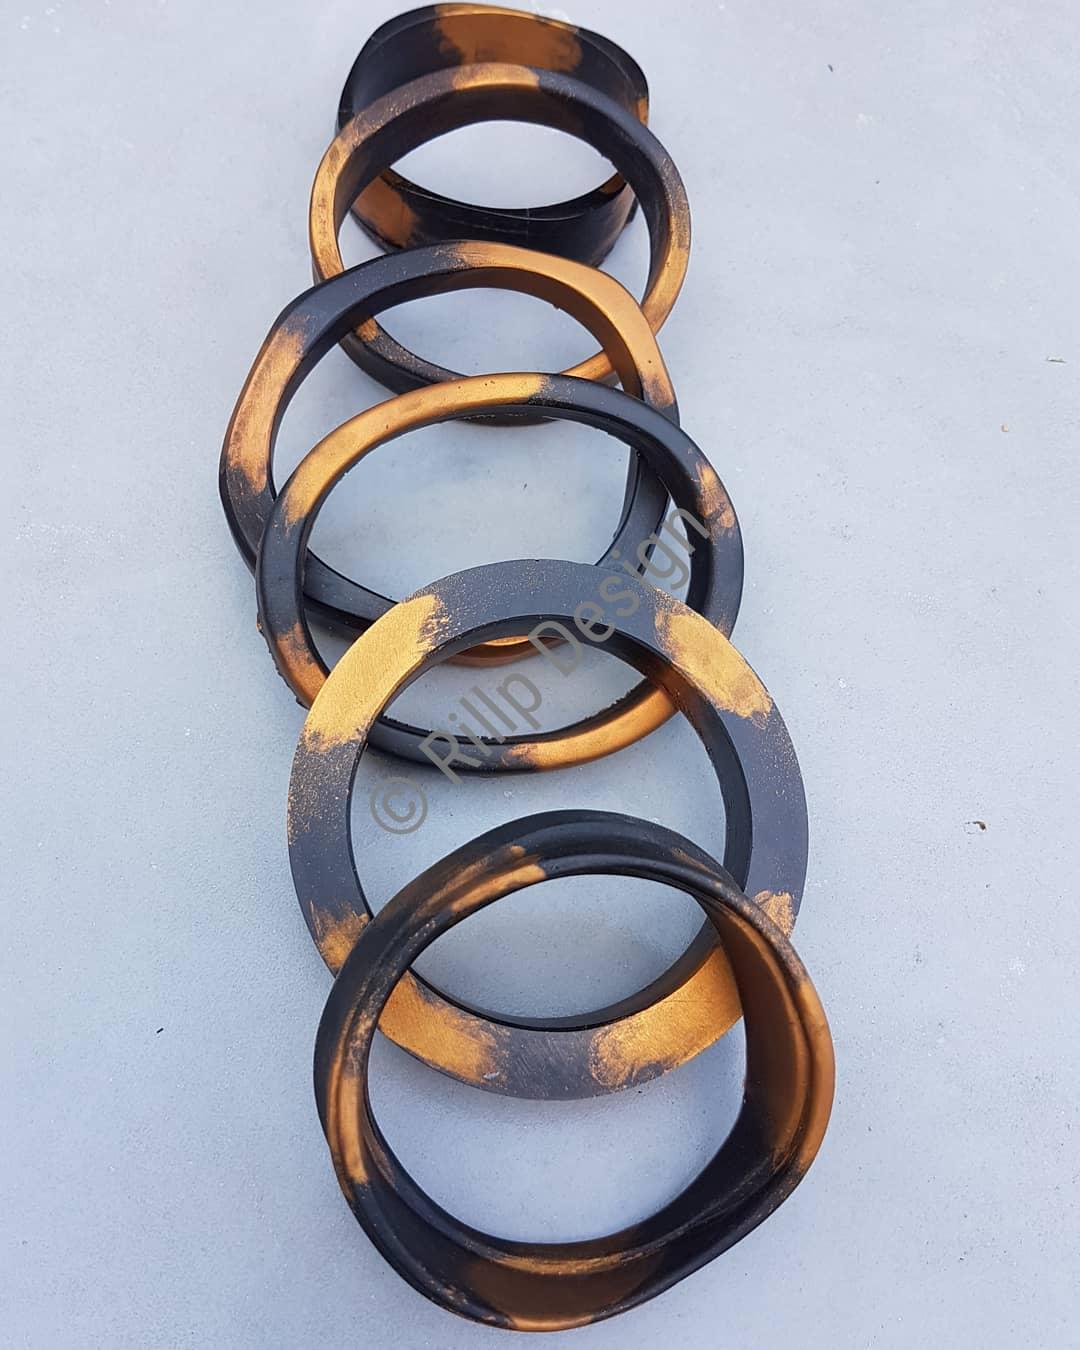 Copper Gold and Black bangles available soon